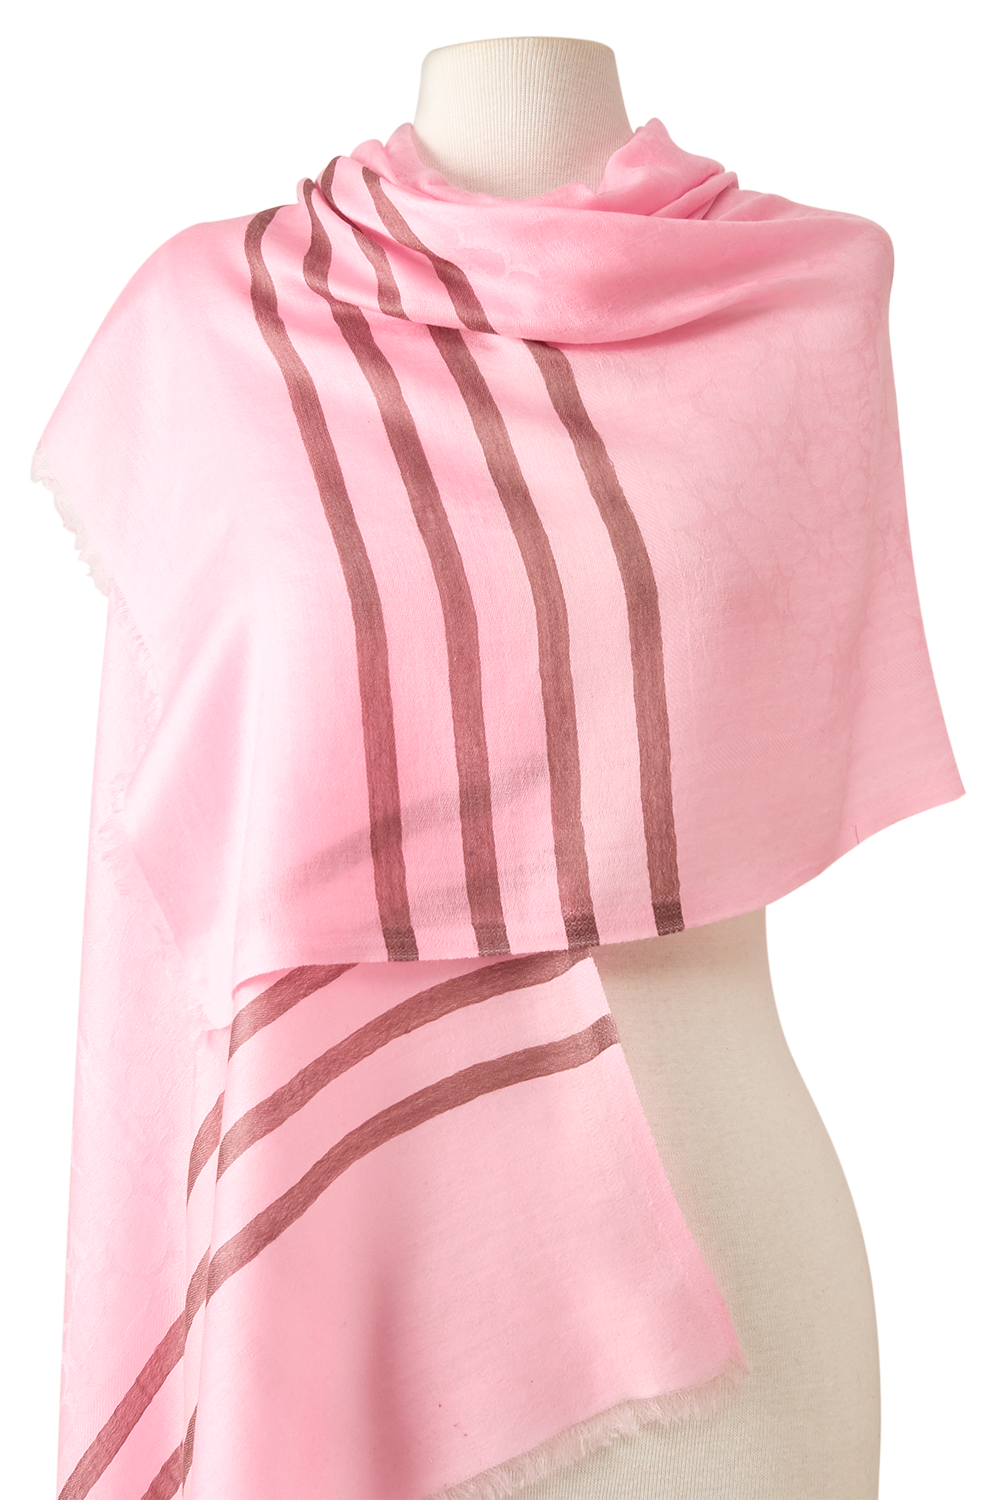 Cashmere Baby rosa claro/taupe